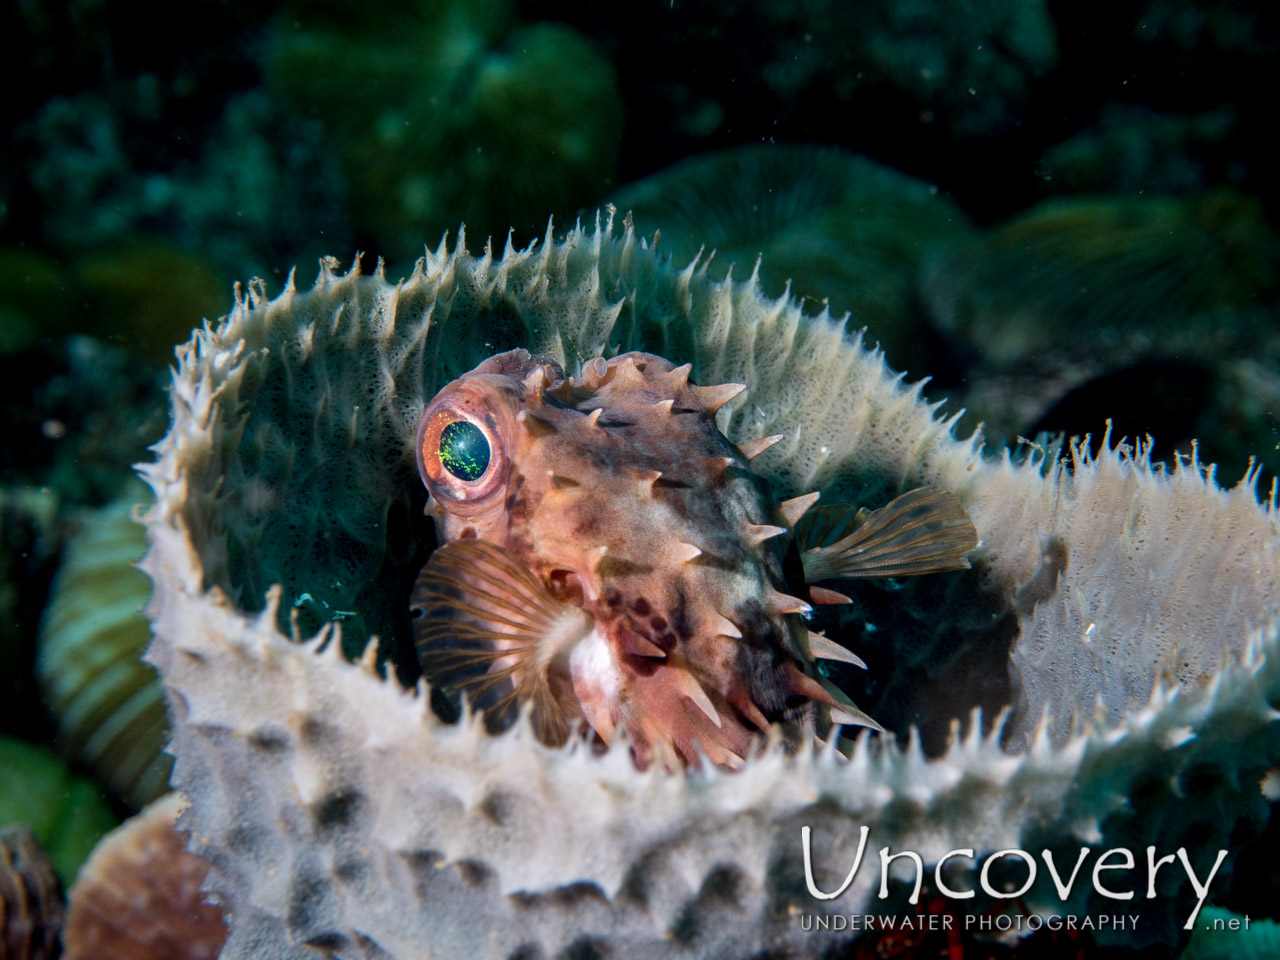 Porcupine Pufferfish (diodon Holocanthus) shot in Indonesia|North Sulawesi|Lembeh Strait|Makawide 3